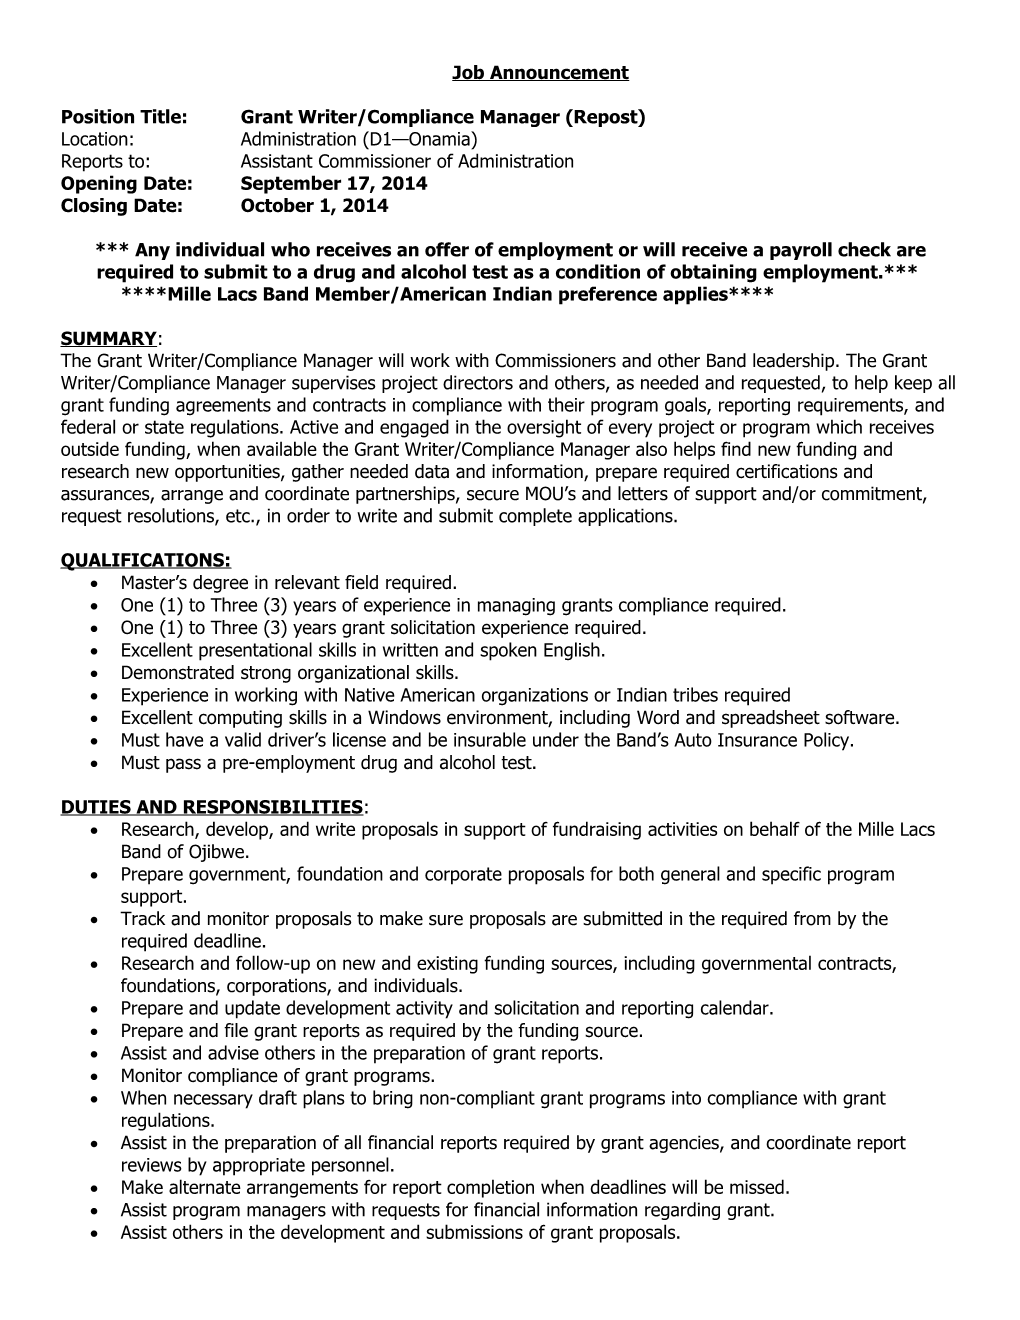 Position Title:Grant Writer/Compliance Manager (Repost)